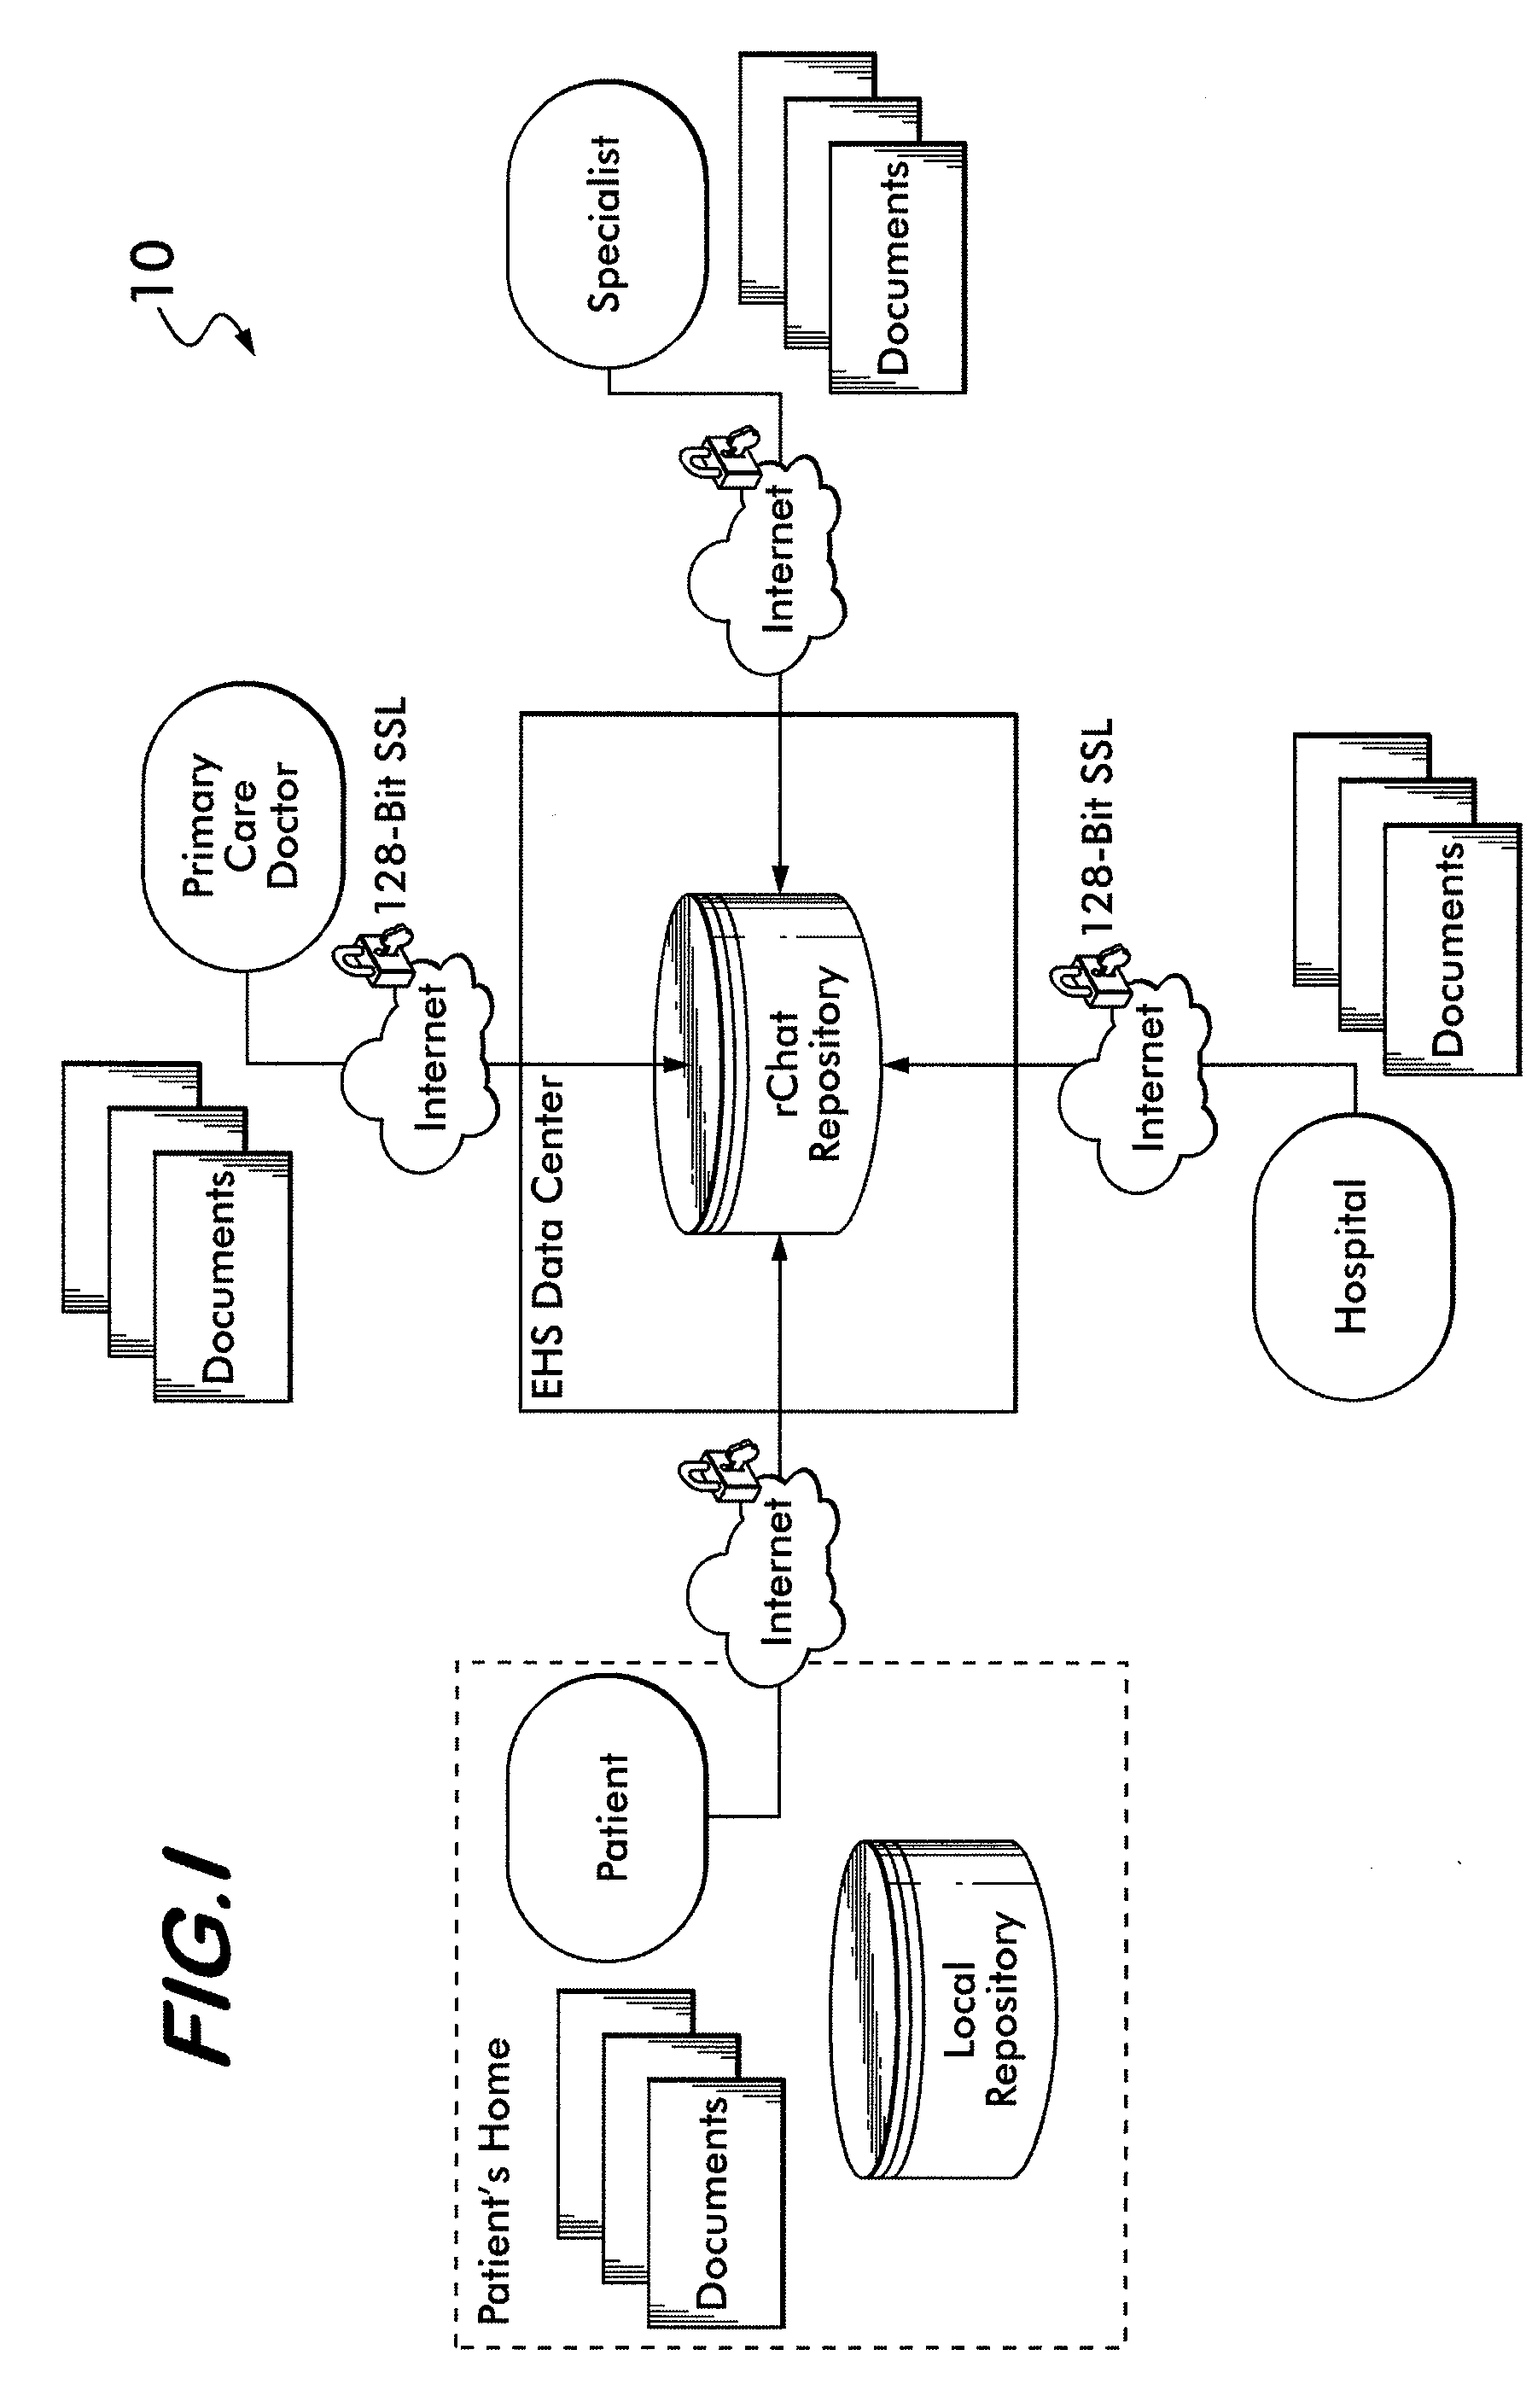 System and method for advertising and deliverig media in conjunction with an electronic medical records management, imaging and sharing system